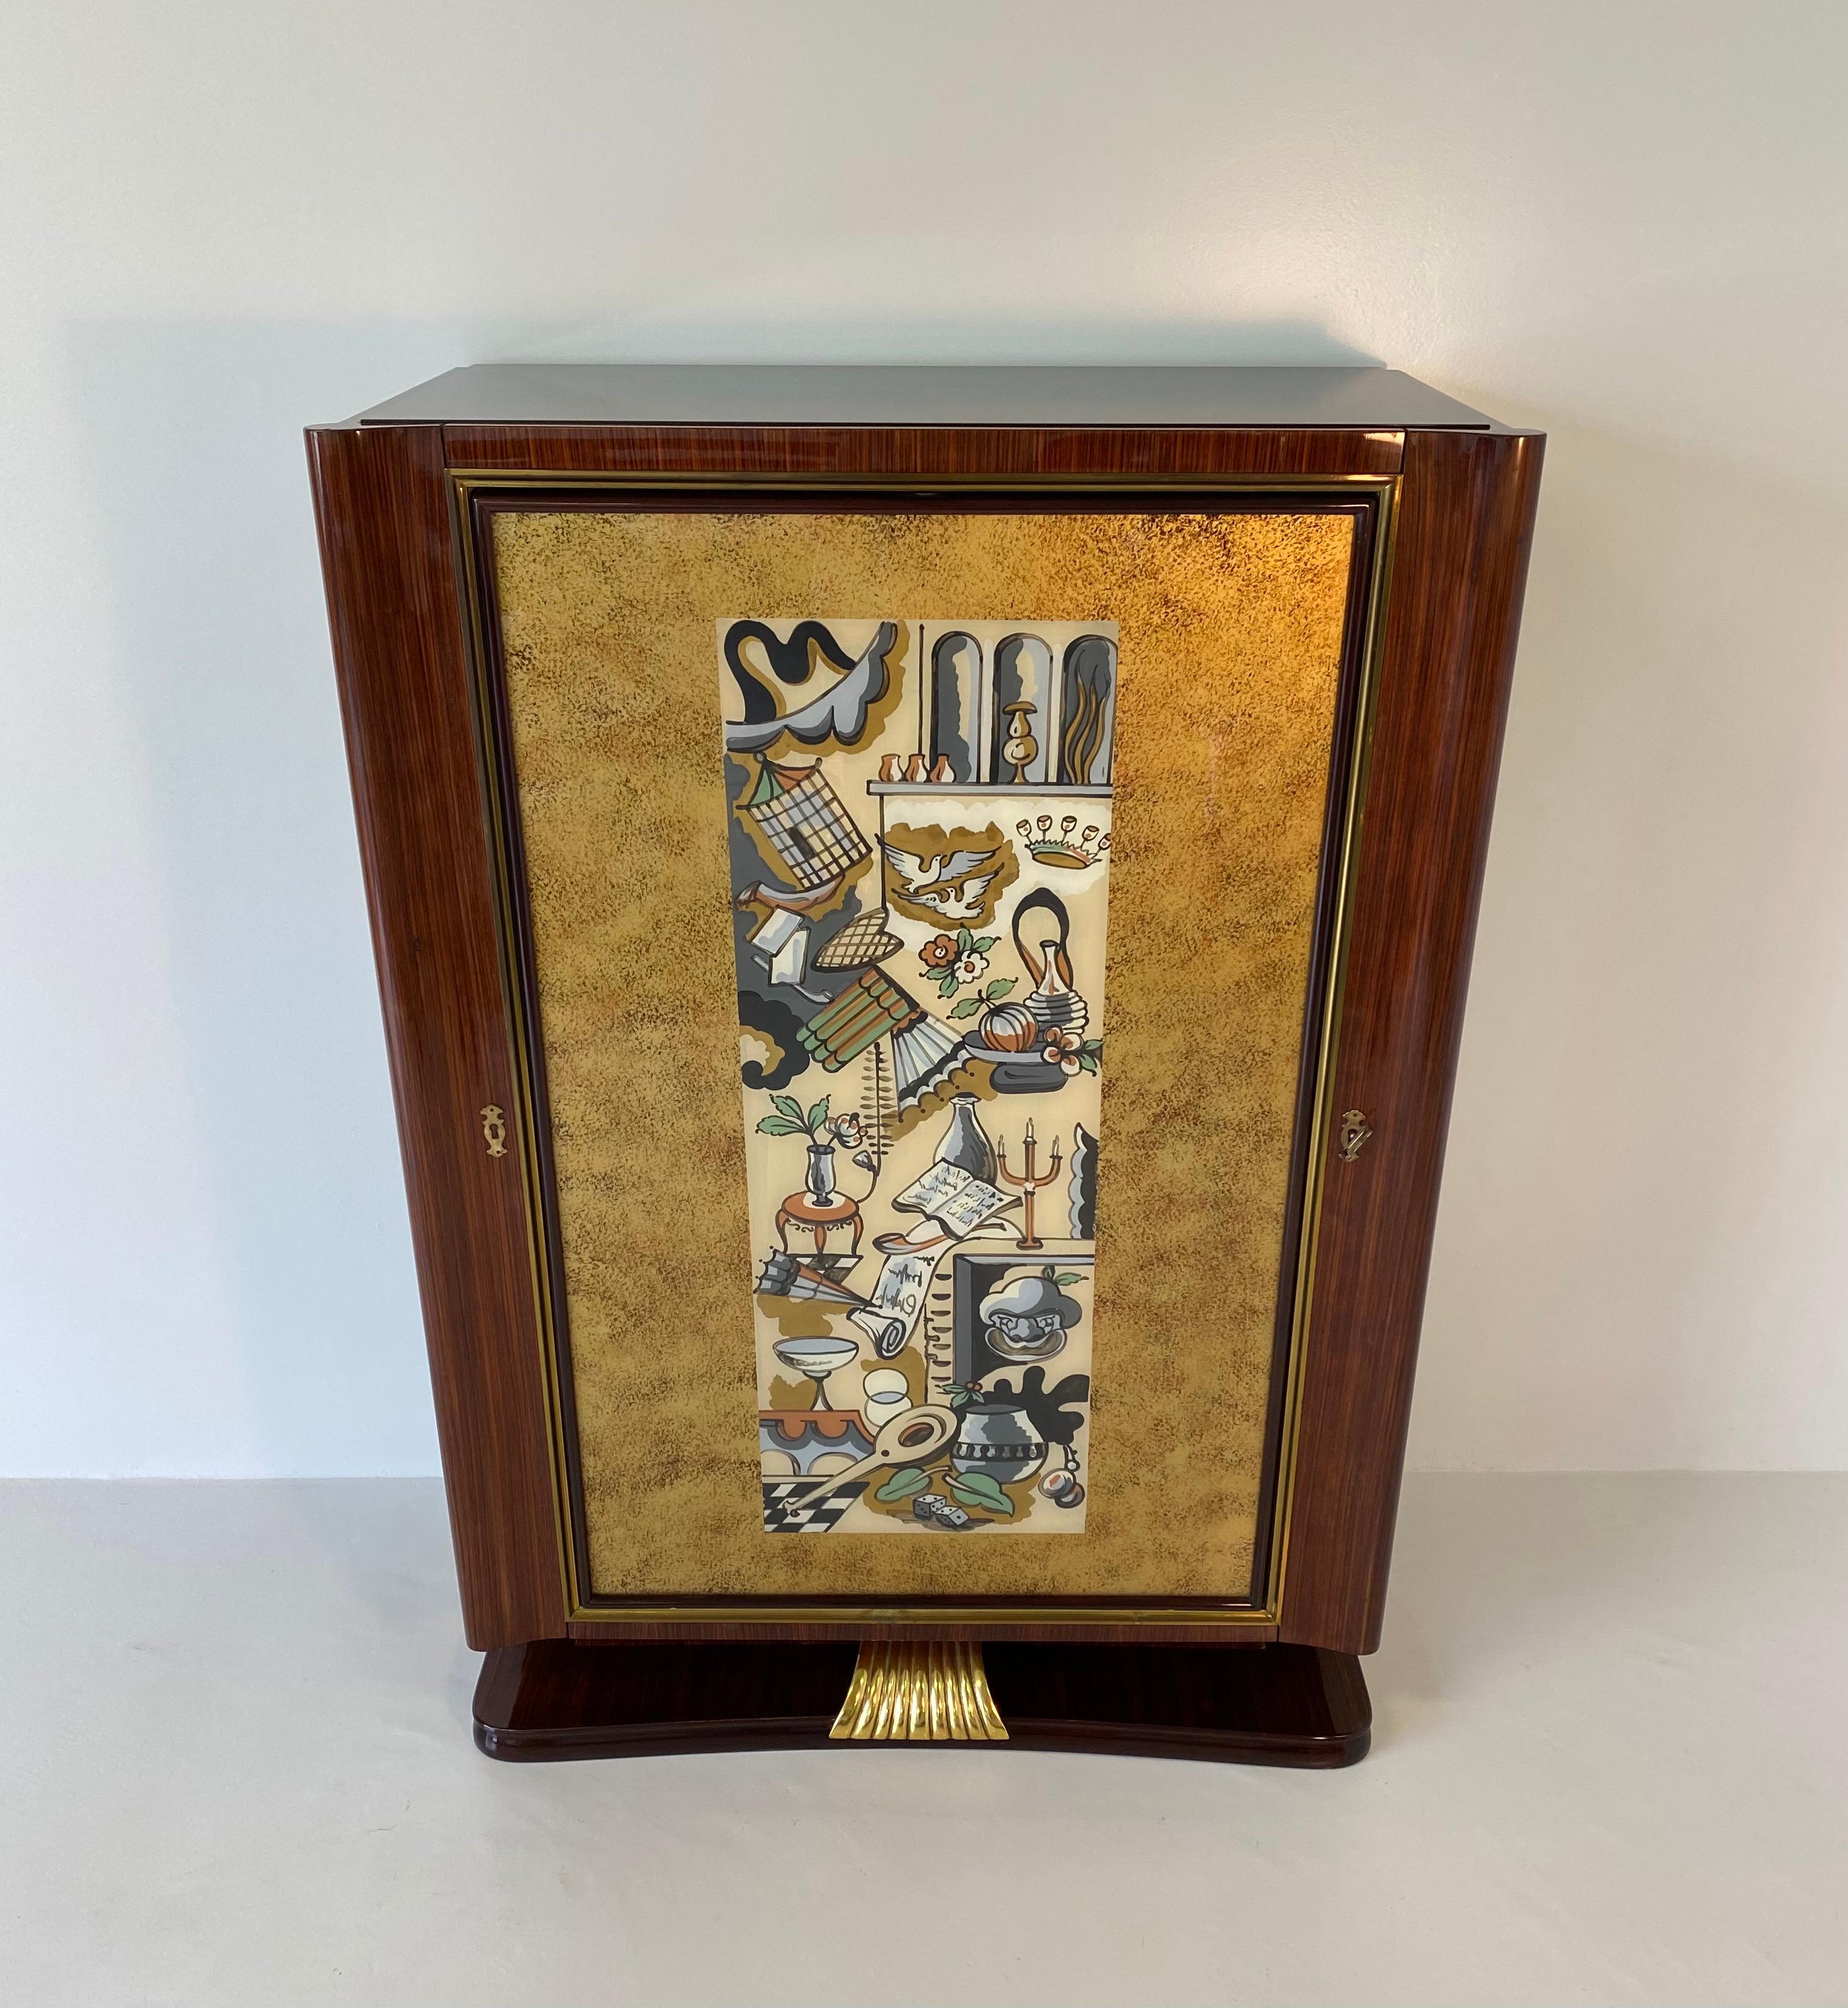 Rare bar cabinet made by the Dassi company during the 1950s.
The structure is in precious wood with gold leaf and eglomisè glass with typically Art Deco designs.
The interiors are in maple with copper and ivory lacquers.
The central door is also